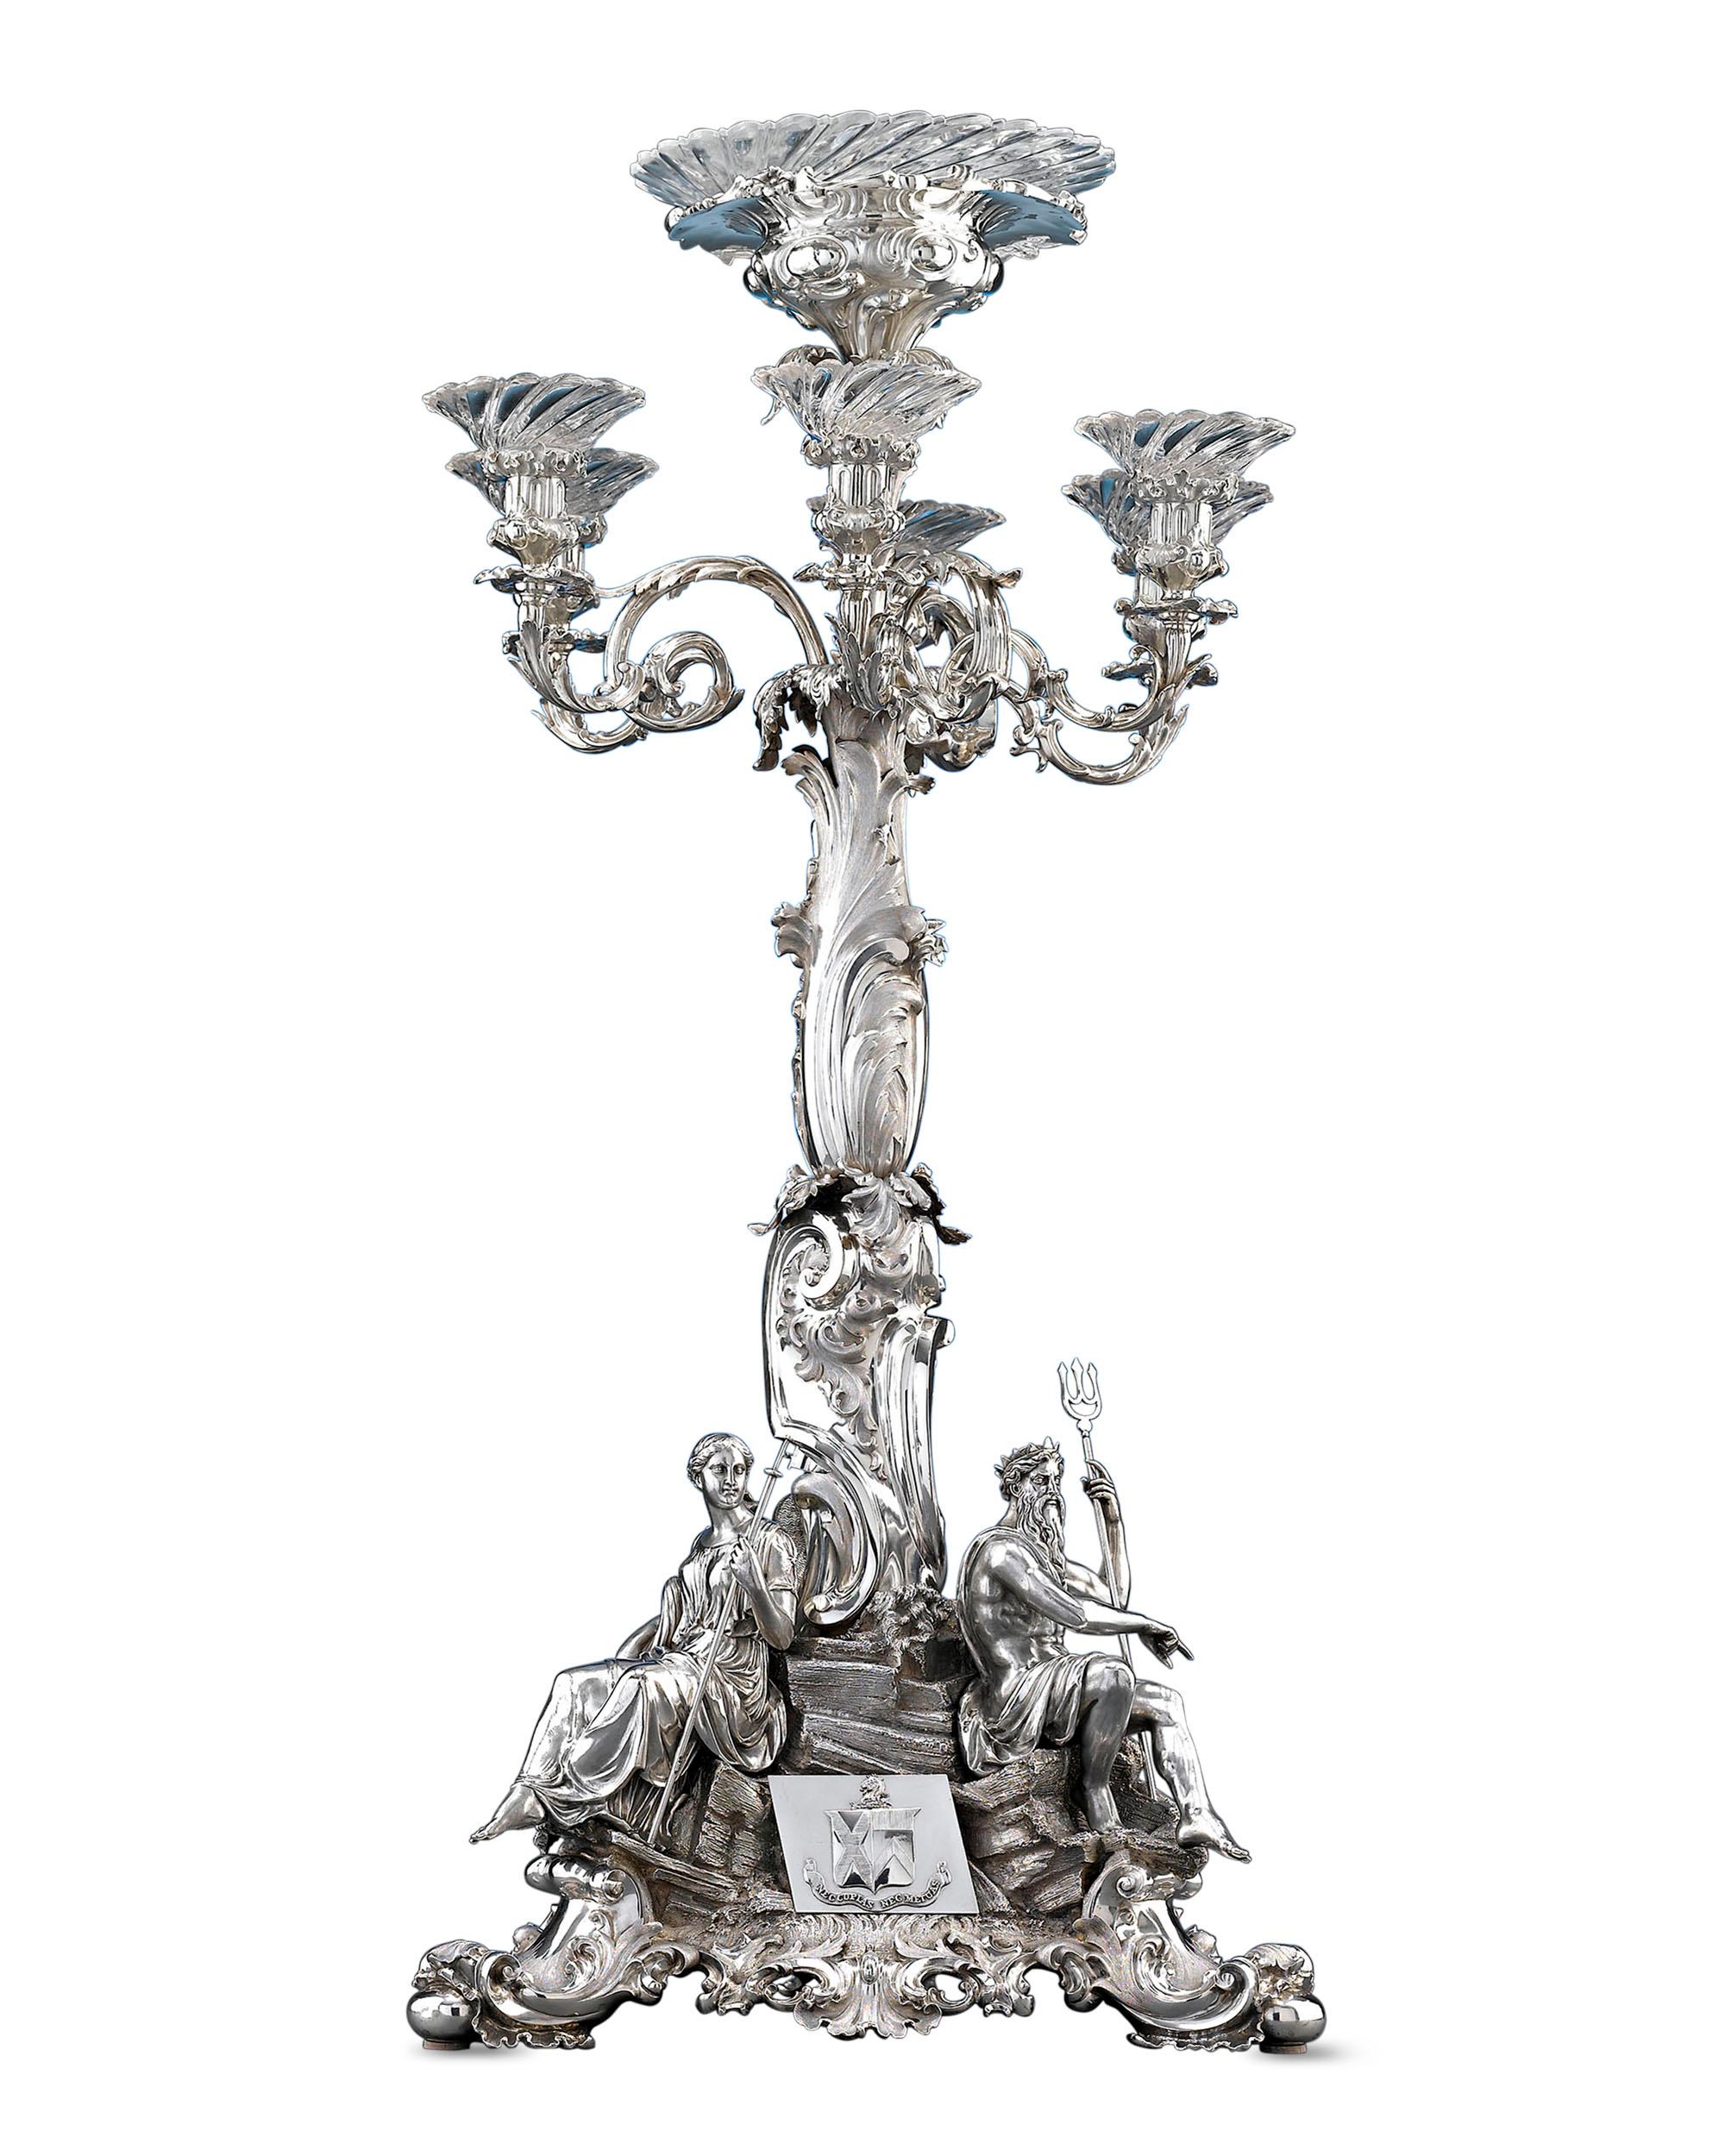 This breathtakingly grand and beautifully crafted sterling silver epergne centerpiece pays homage to the builder of Victoria Bridge in Glasgow, which was one of the two largest bridges in Britain at the time. Masterful skill and incredible precision